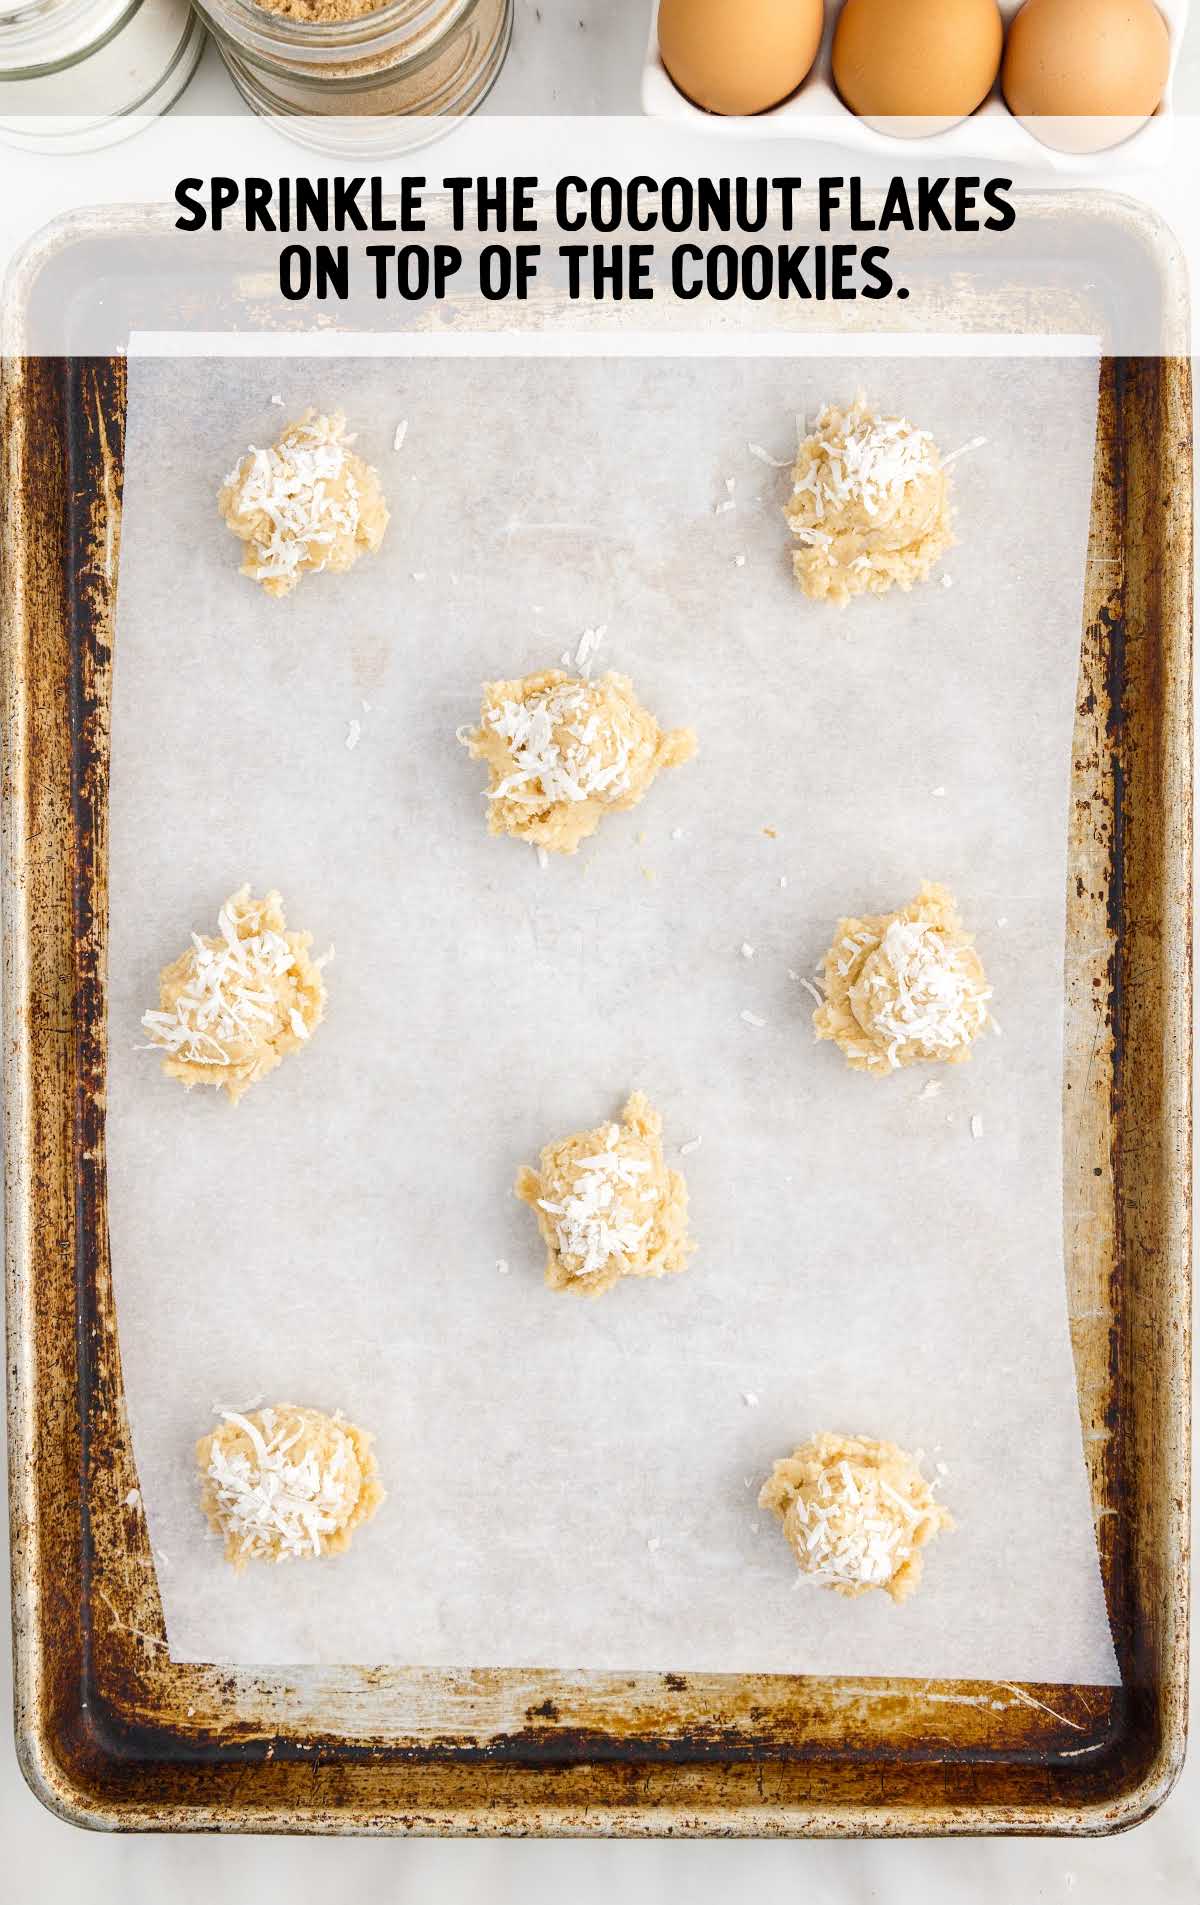 coconut flakes sprinkled on top of the cookies